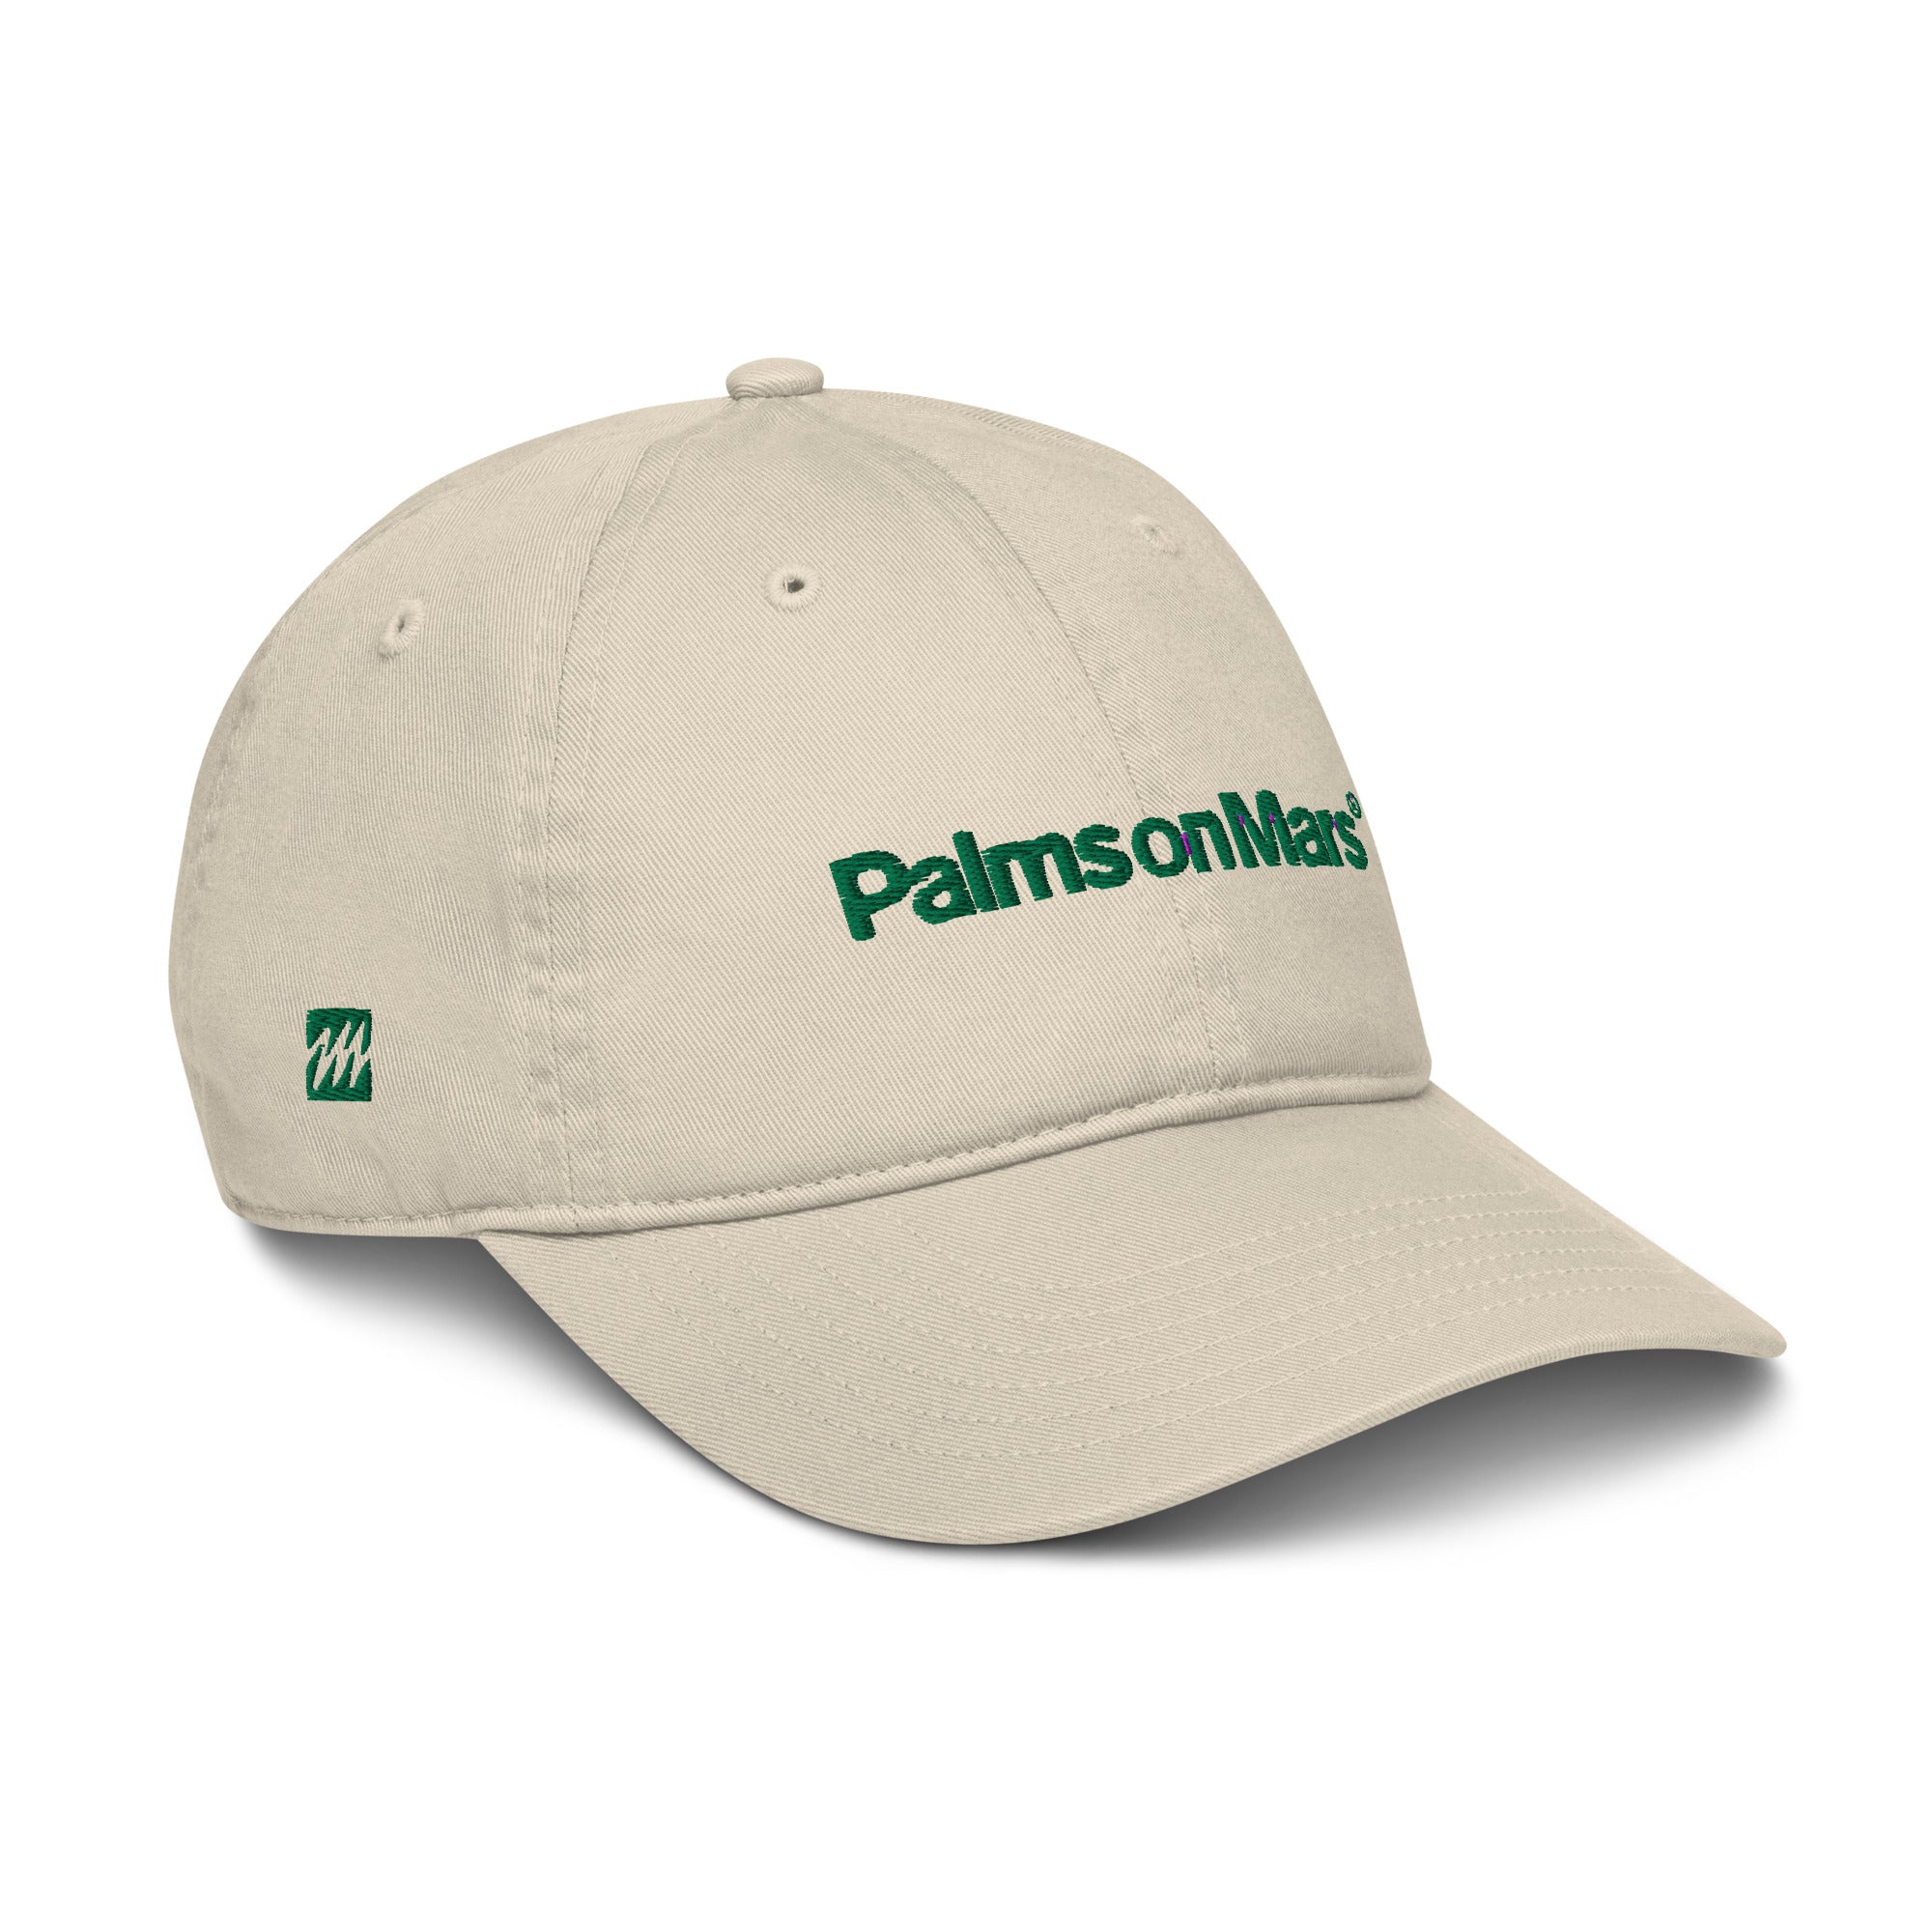 Palms on Mars limited edition classic dad cap